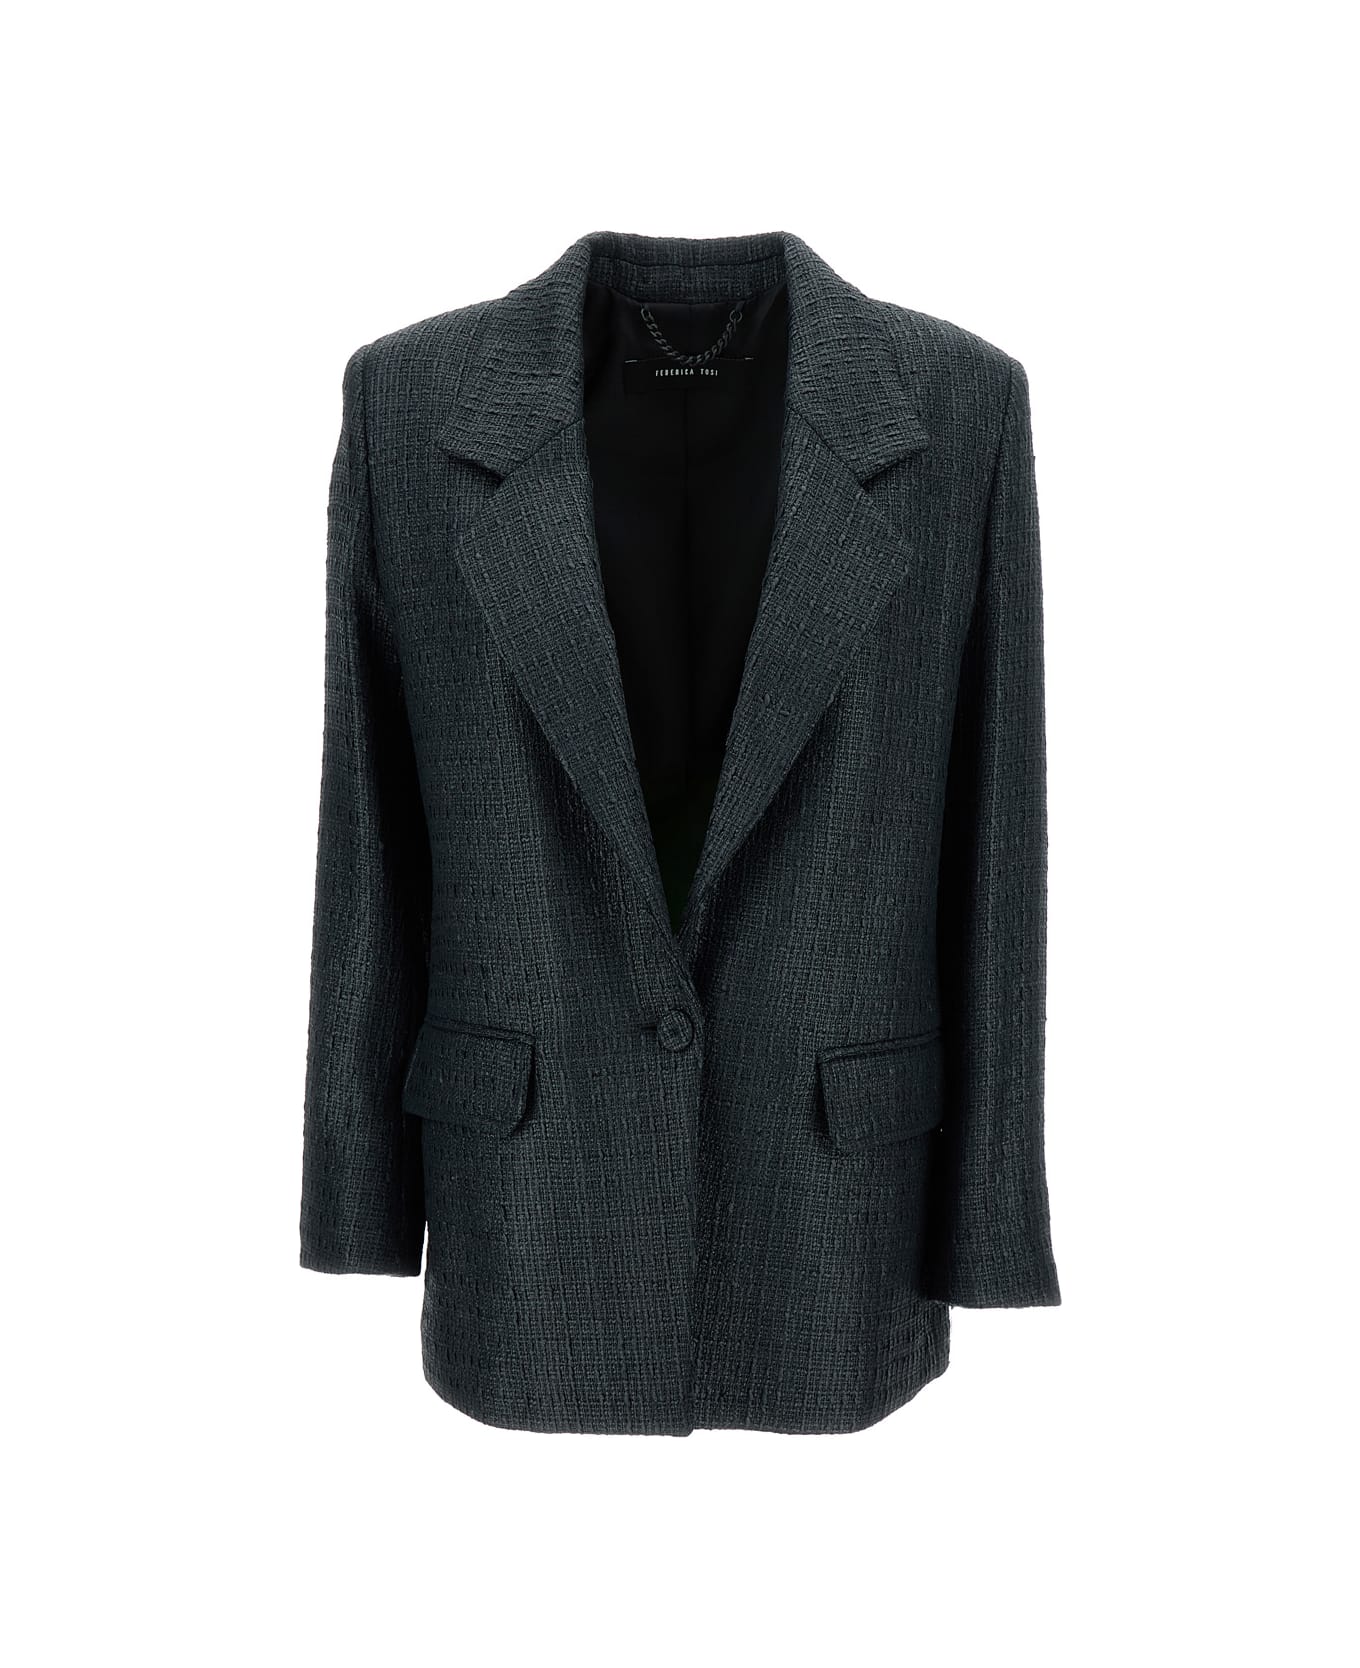 Federica Tosi Black Single-breasted Jacket With A Single Button In Cotton Blend Man - Black ブレザー